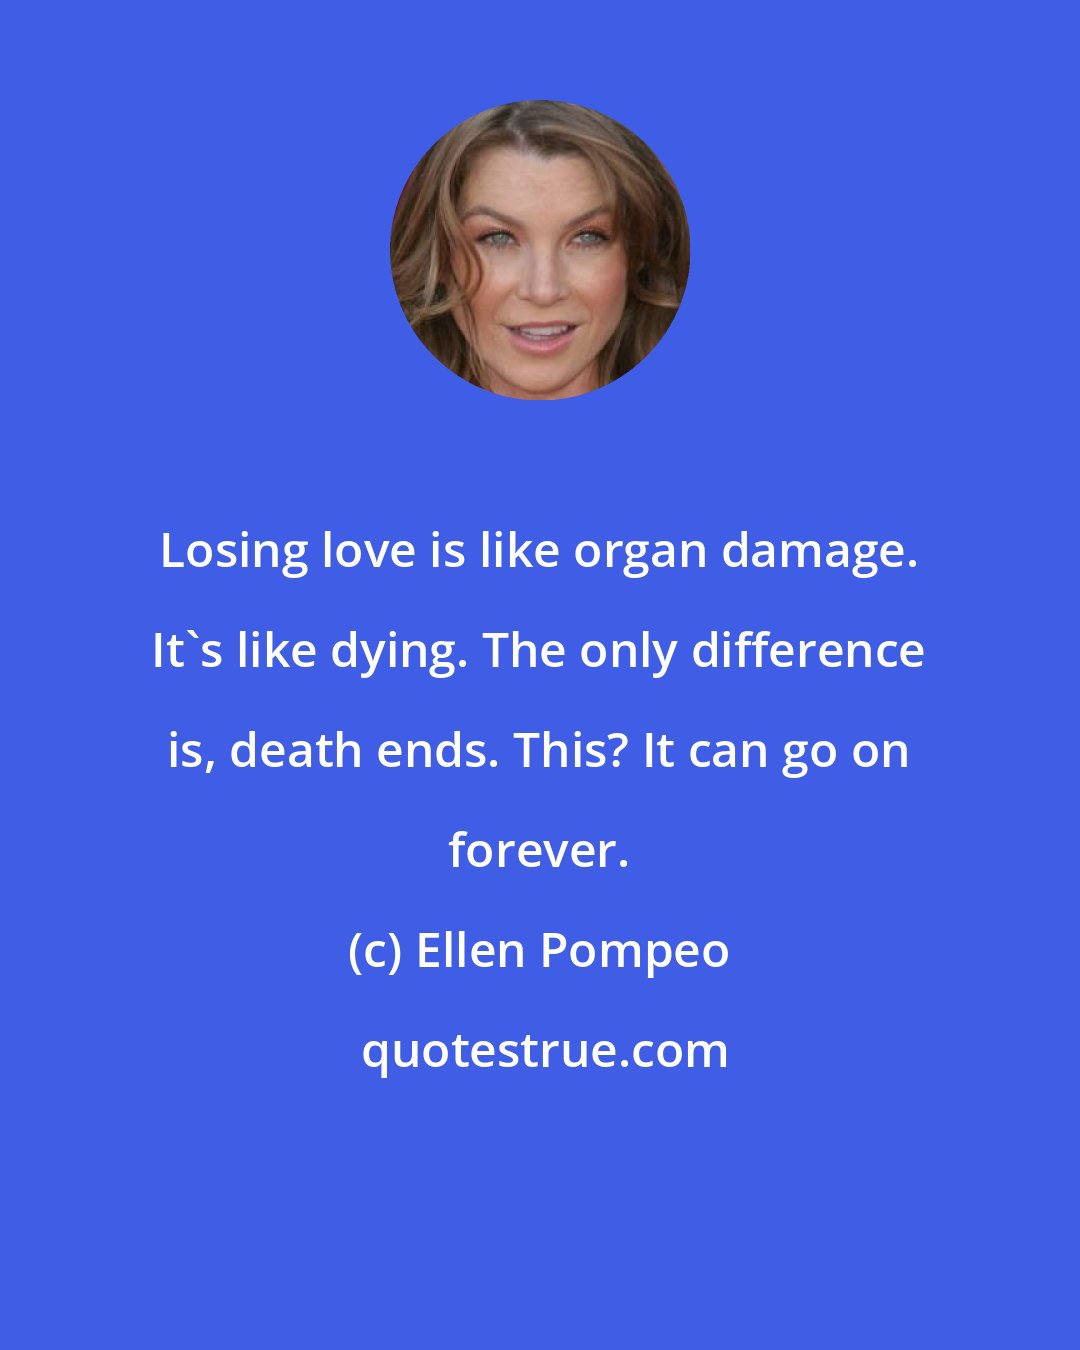 Ellen Pompeo: Losing love is like organ damage. It's like dying. The only difference is, death ends. This? It can go on forever.